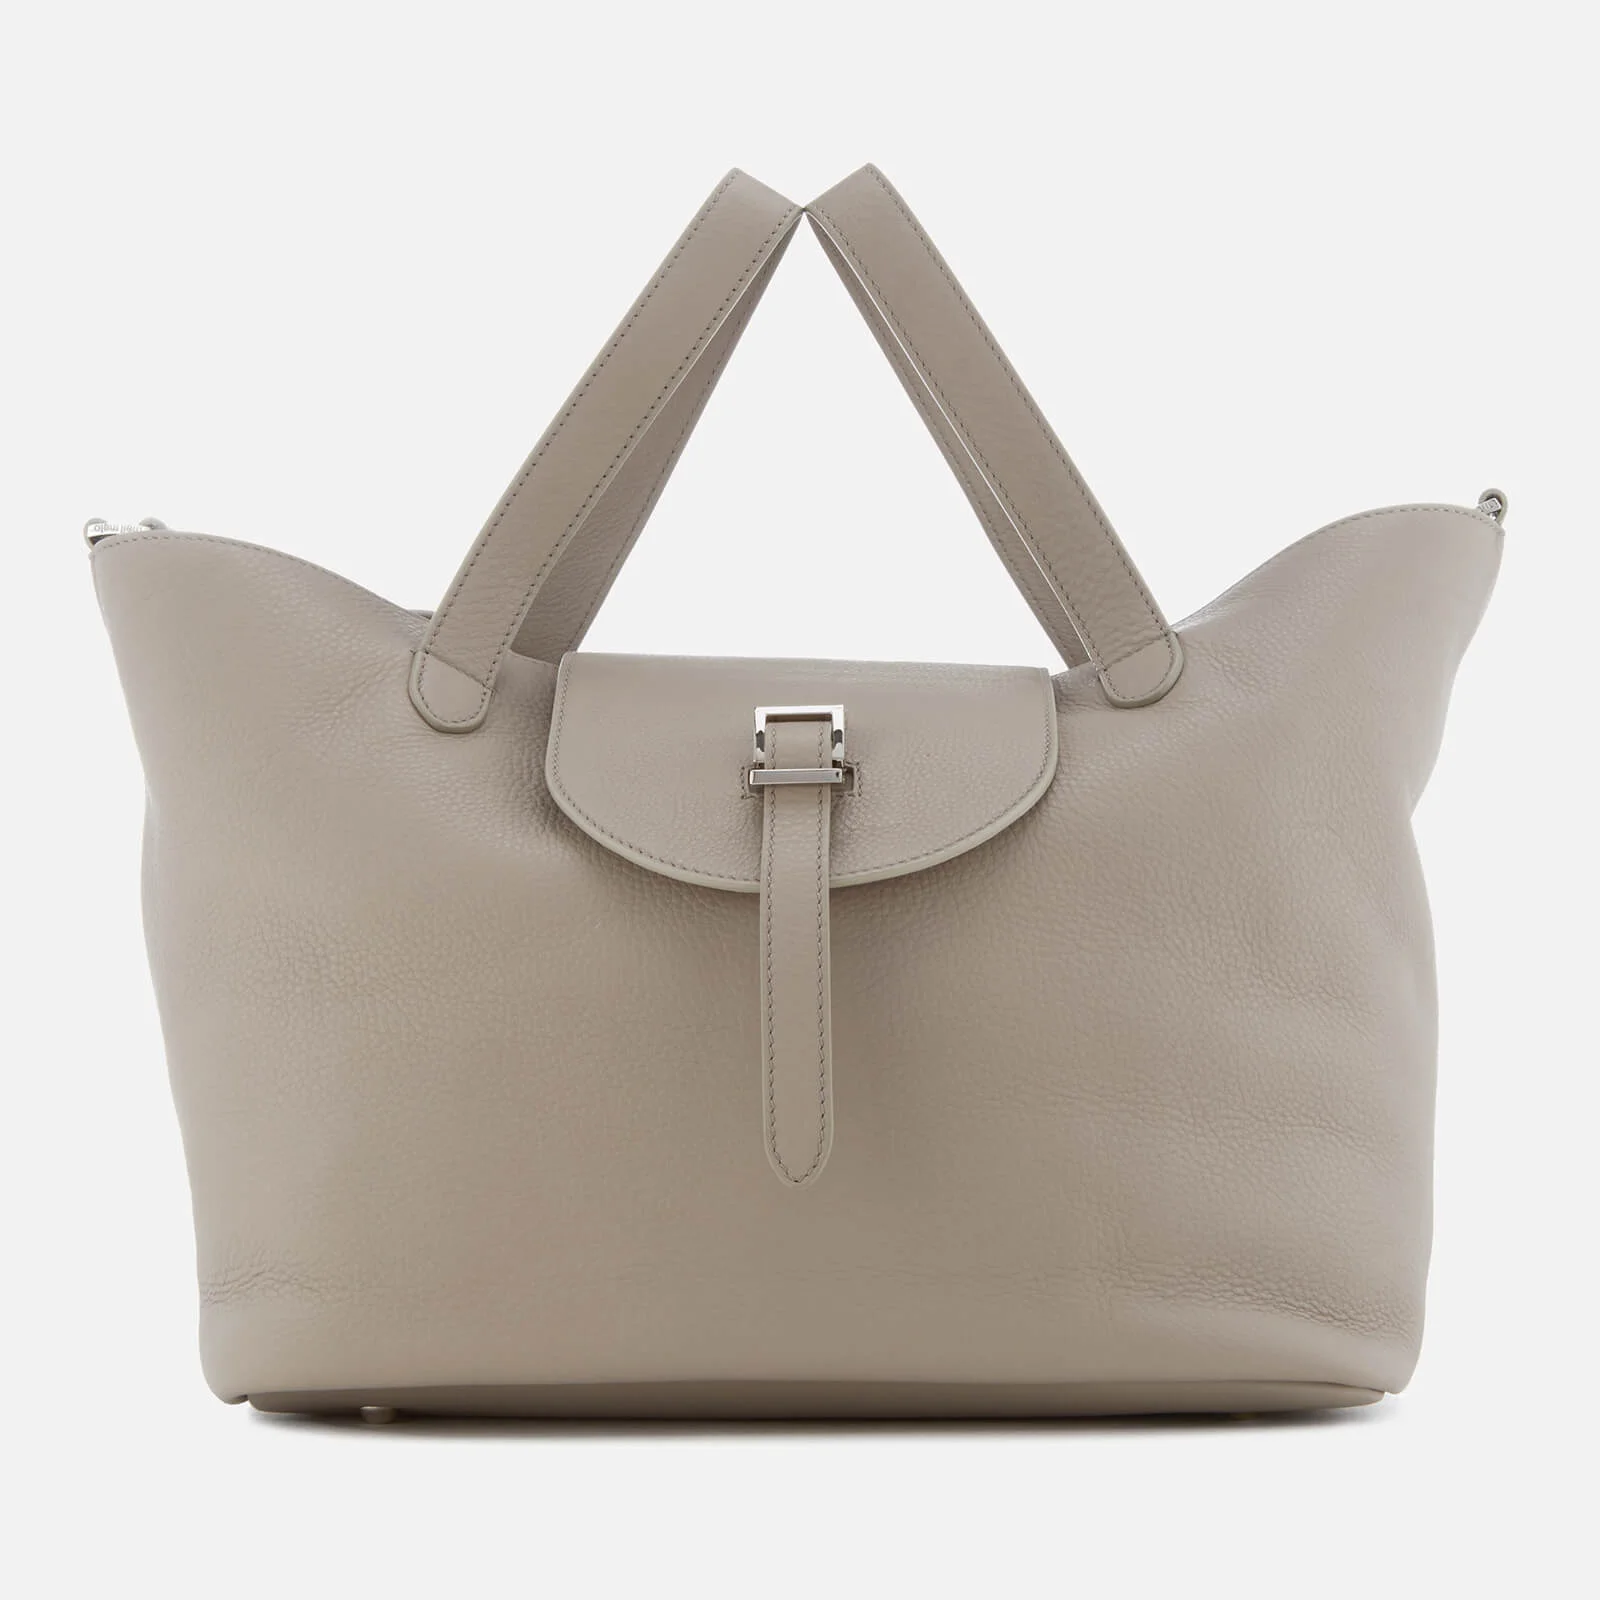 meli melo Women's Thela Tote Bag - Taupe Image 1